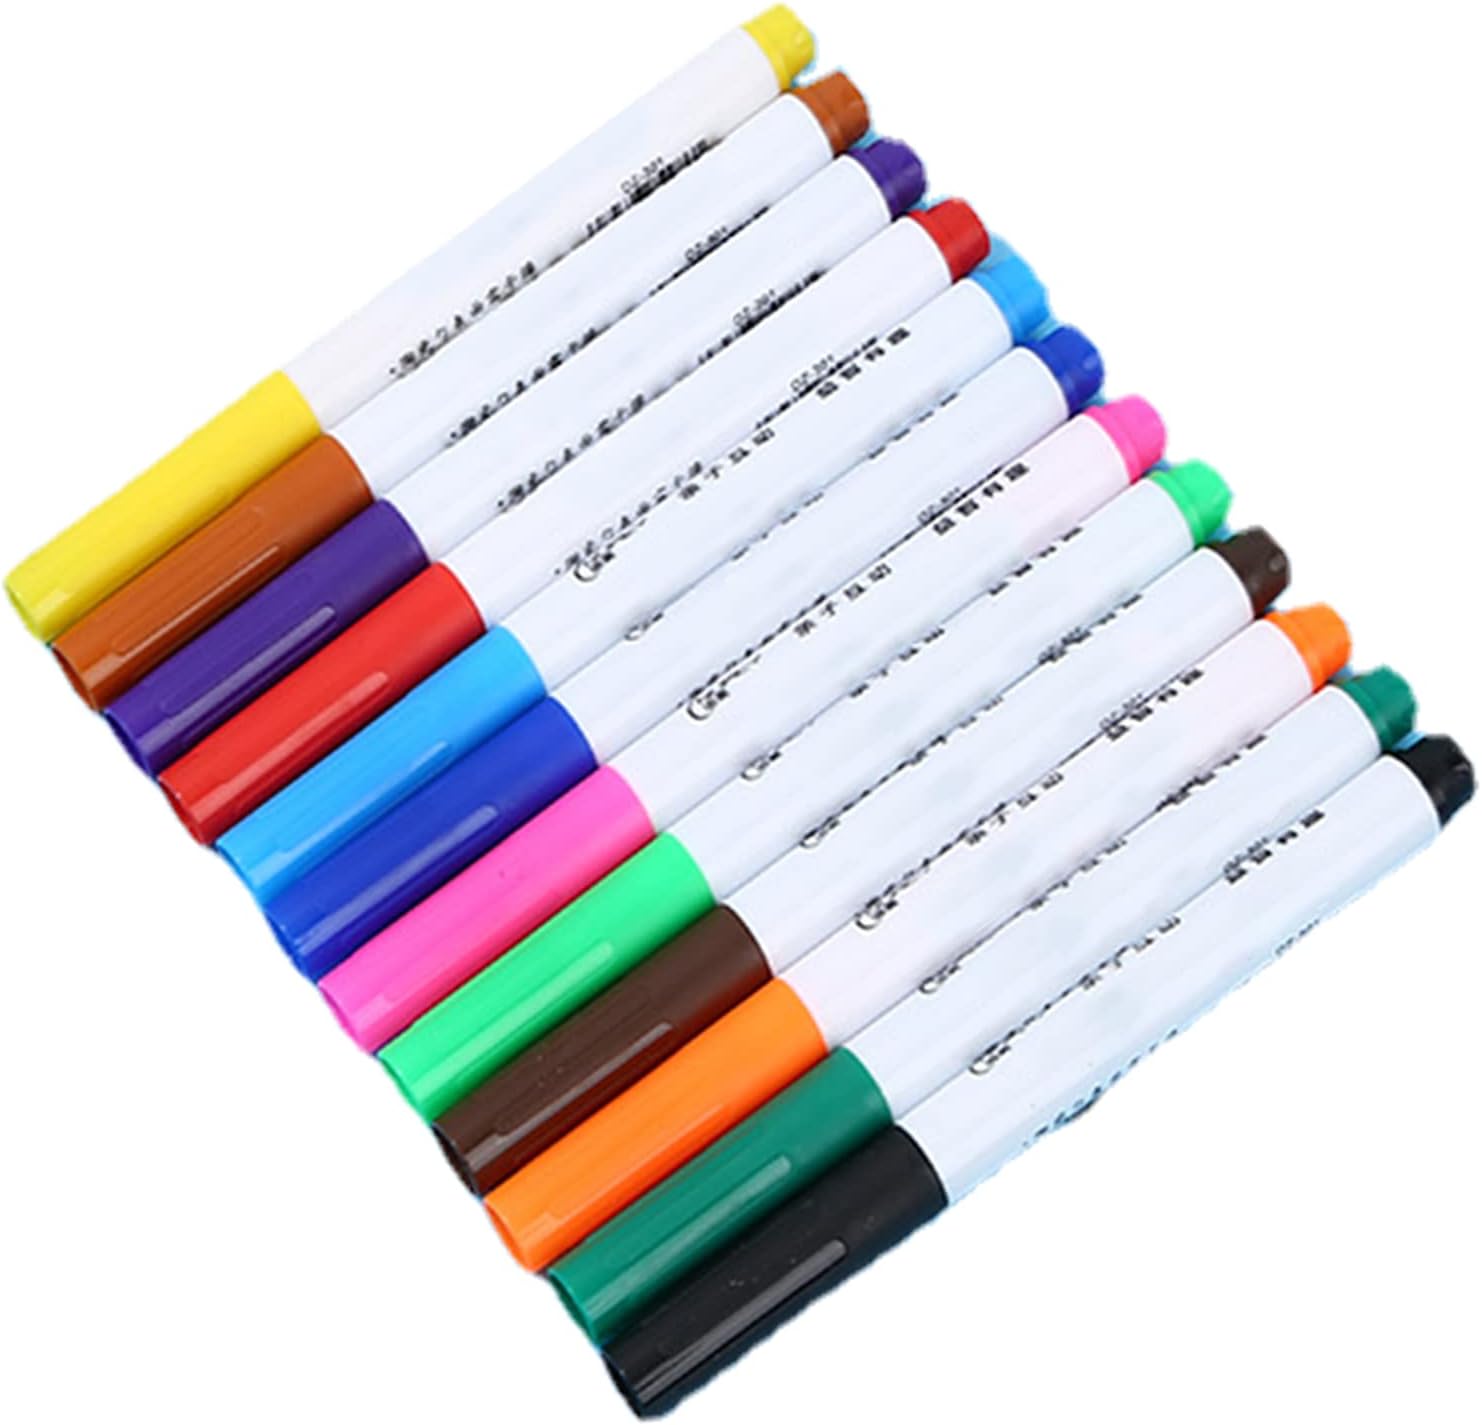 Magical Water Painting Pen - 12-Color Magical Floating Water Painting Pen